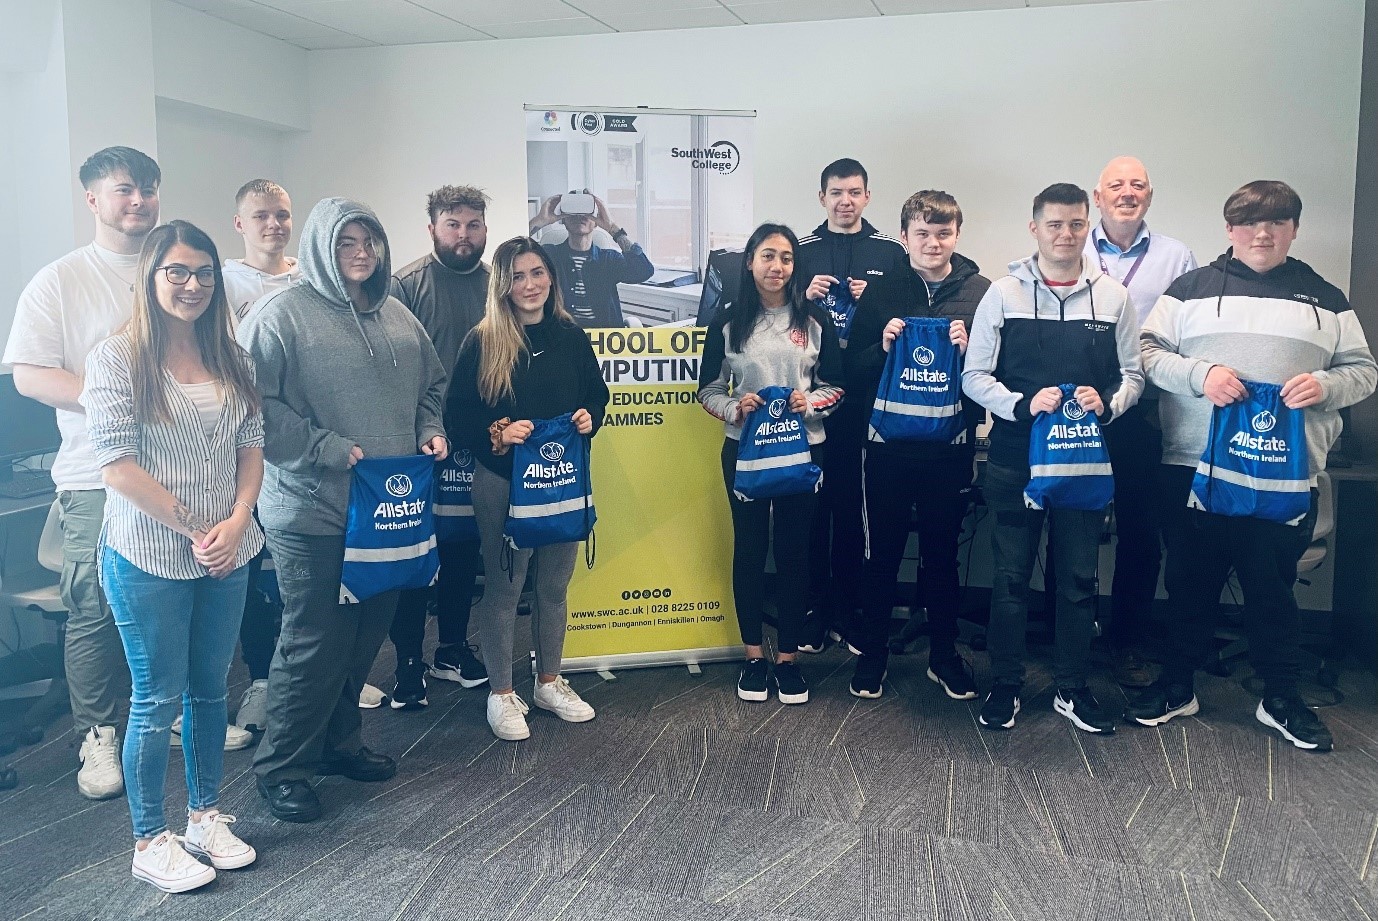 South West College, Level 3 Extended Diploma in IT students celebrating the completion of their project based learning module alongside Aine Mc Namee, Allstate.